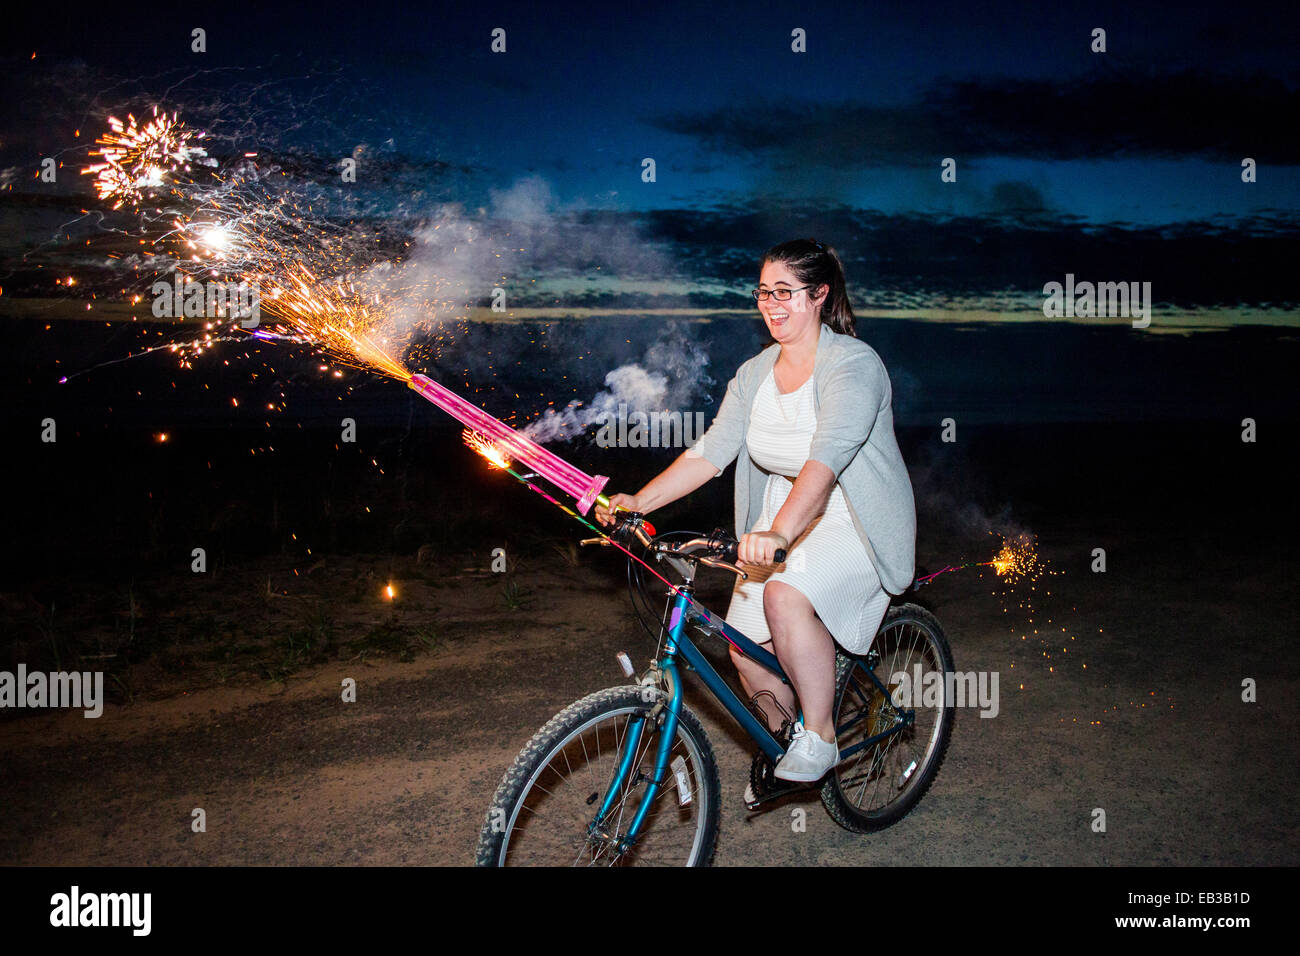 Woman holding fireworks on bicycle at night Stock Photo